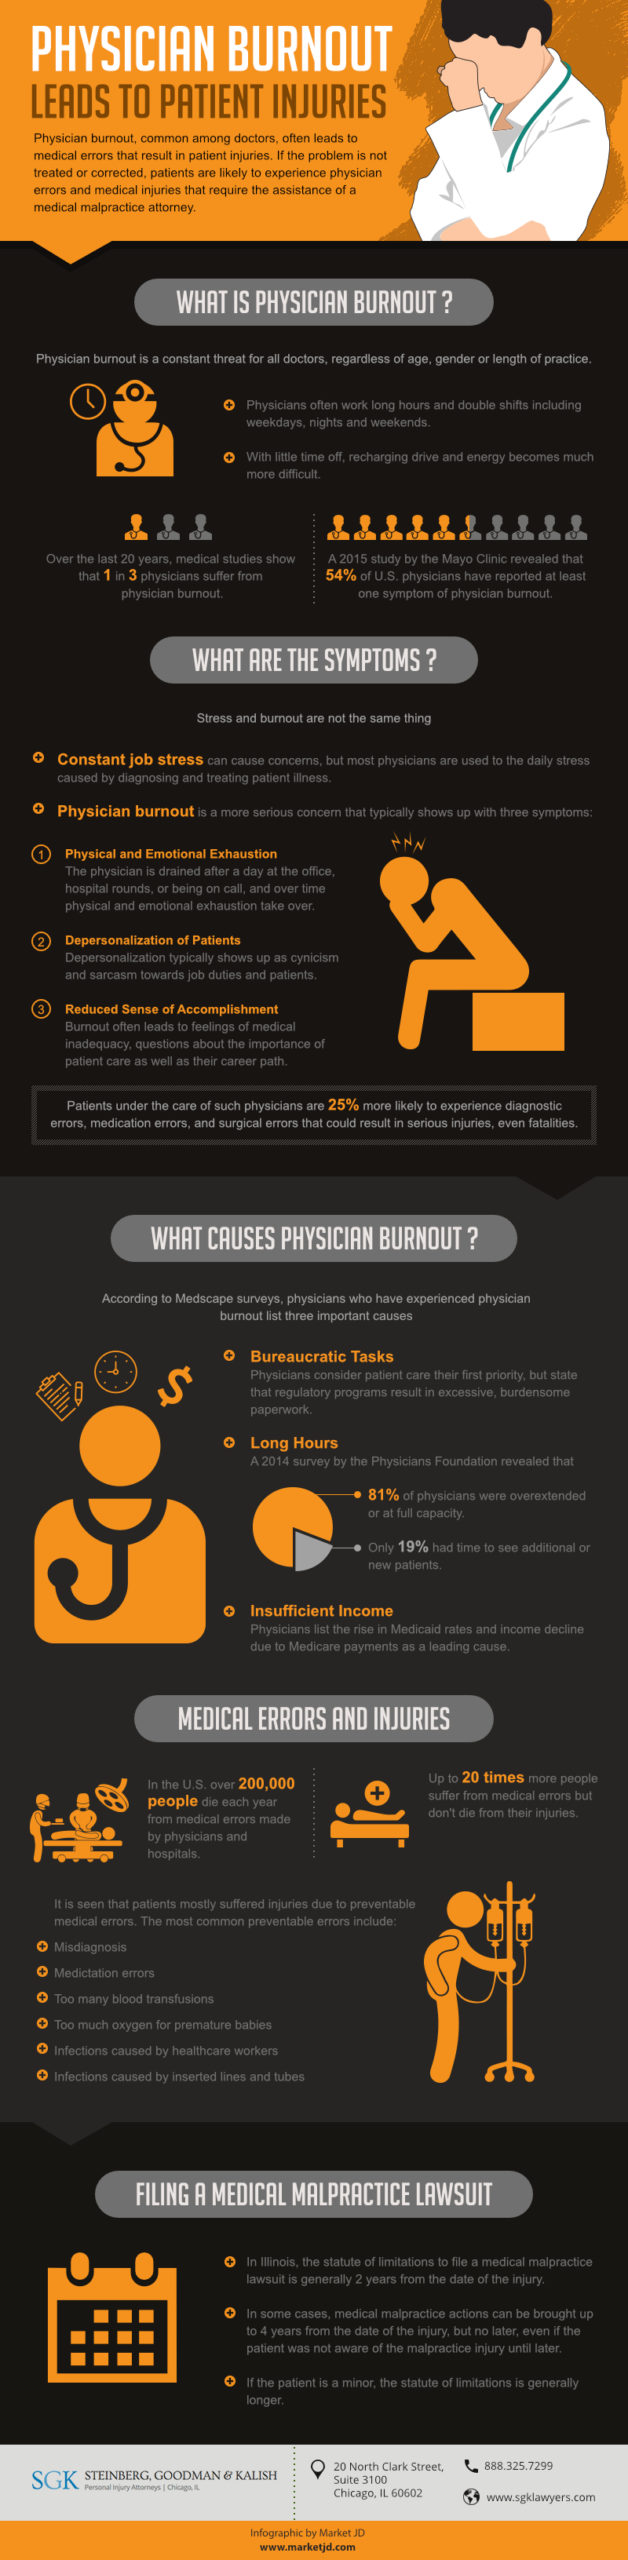 Steinberg_#1_August_Short_Physician Burnout Leads to Patient Injuries.jpg